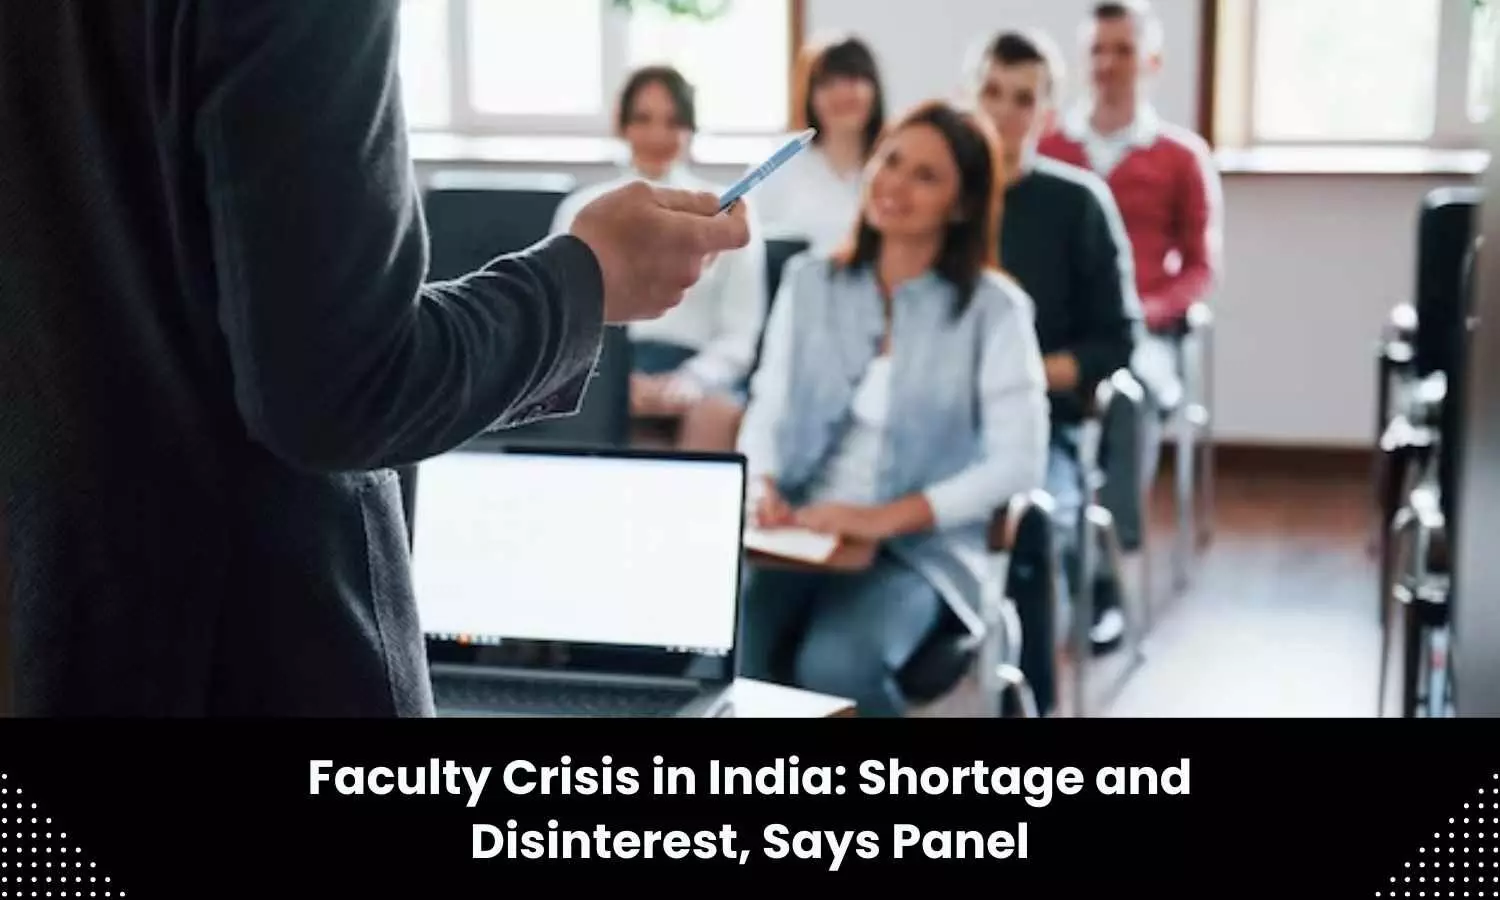 Shortage of faculty in India is twofold- Lack of inclination to teach at college level and Genuine shortage: Parliamentary Panel